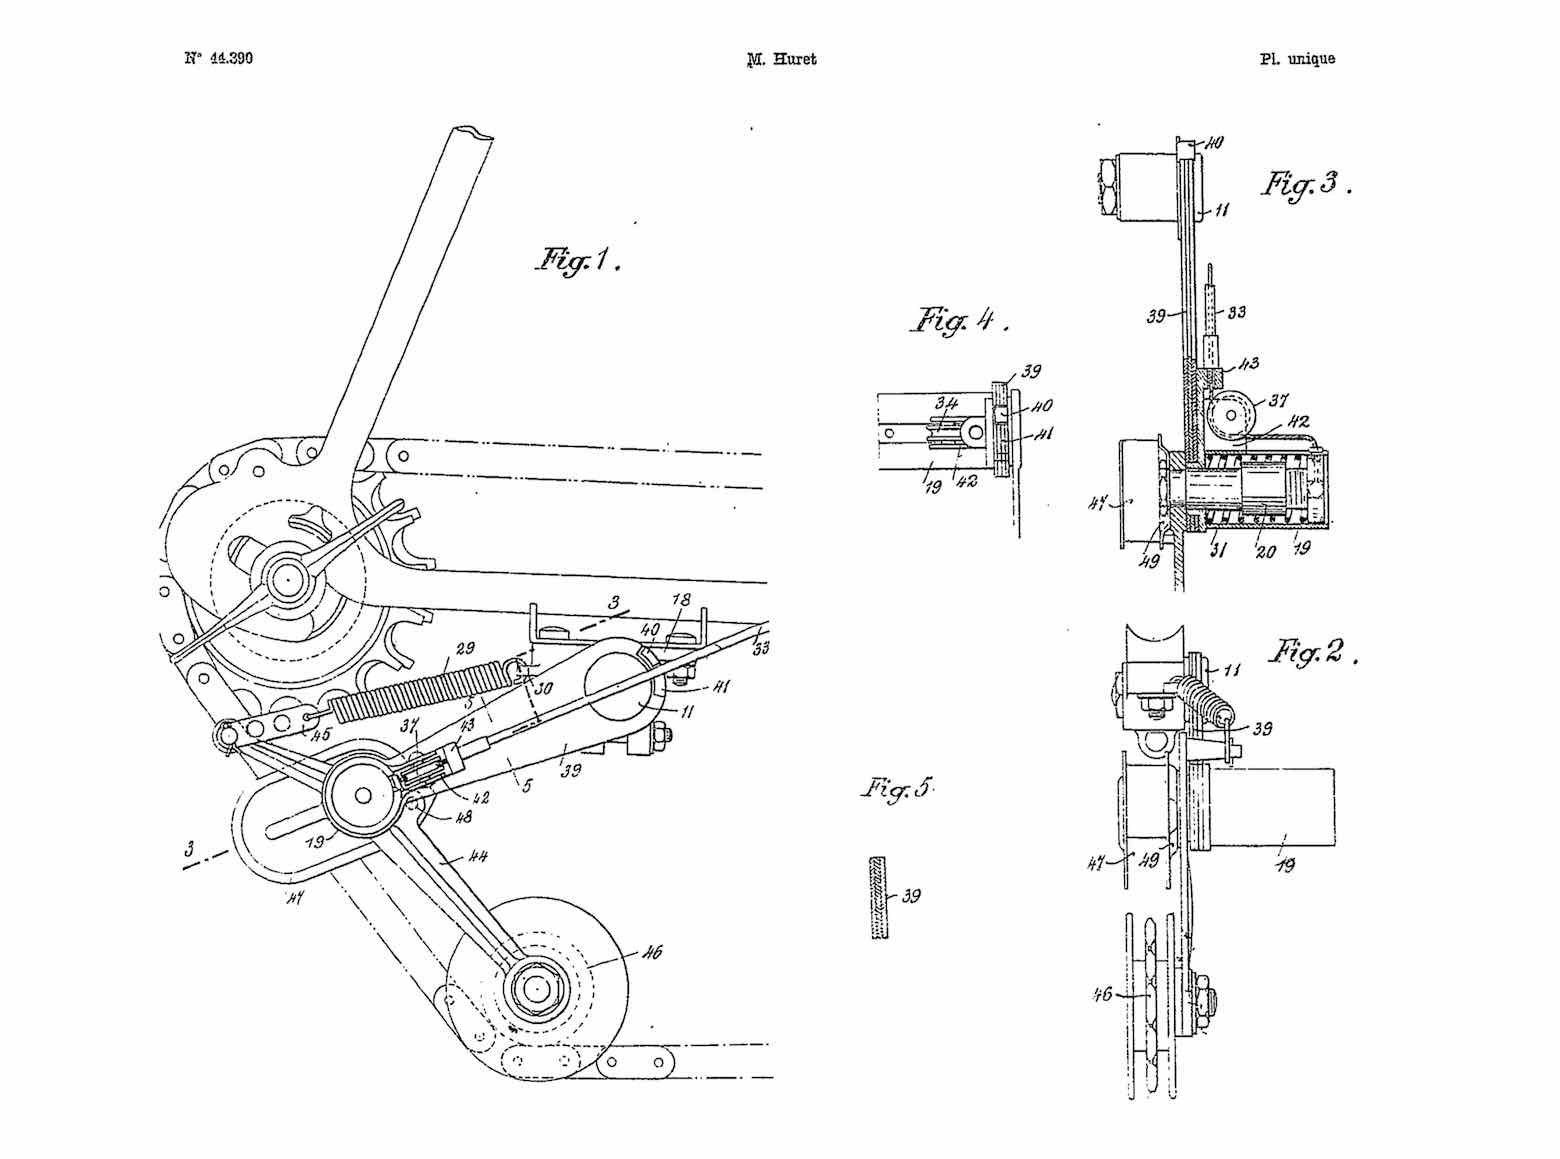 French Patent 729,910 addition 44,390 - Huret scan 3 main image